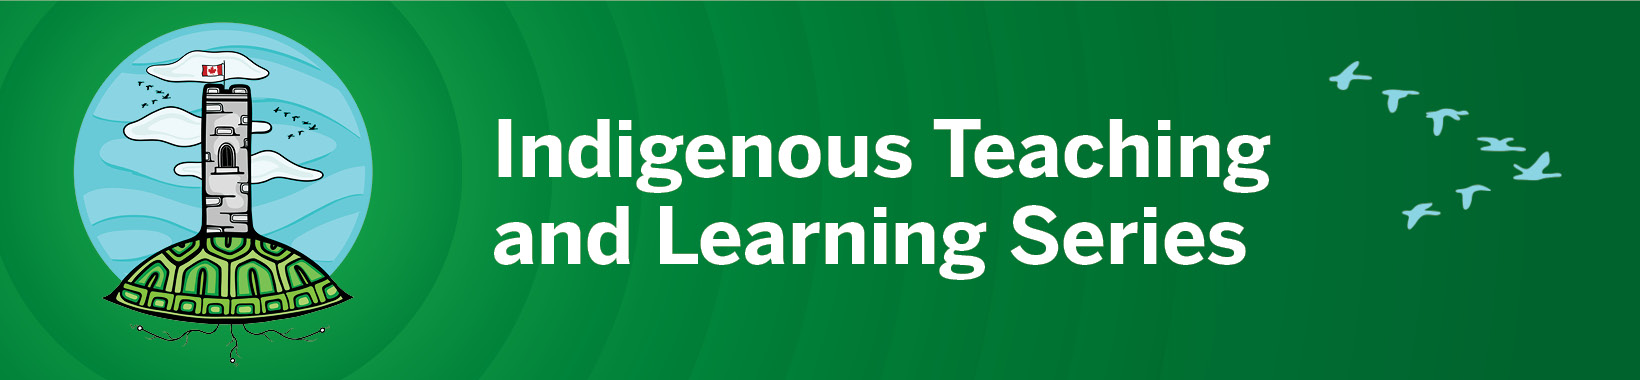 Indigenous Teaching and Learning Series